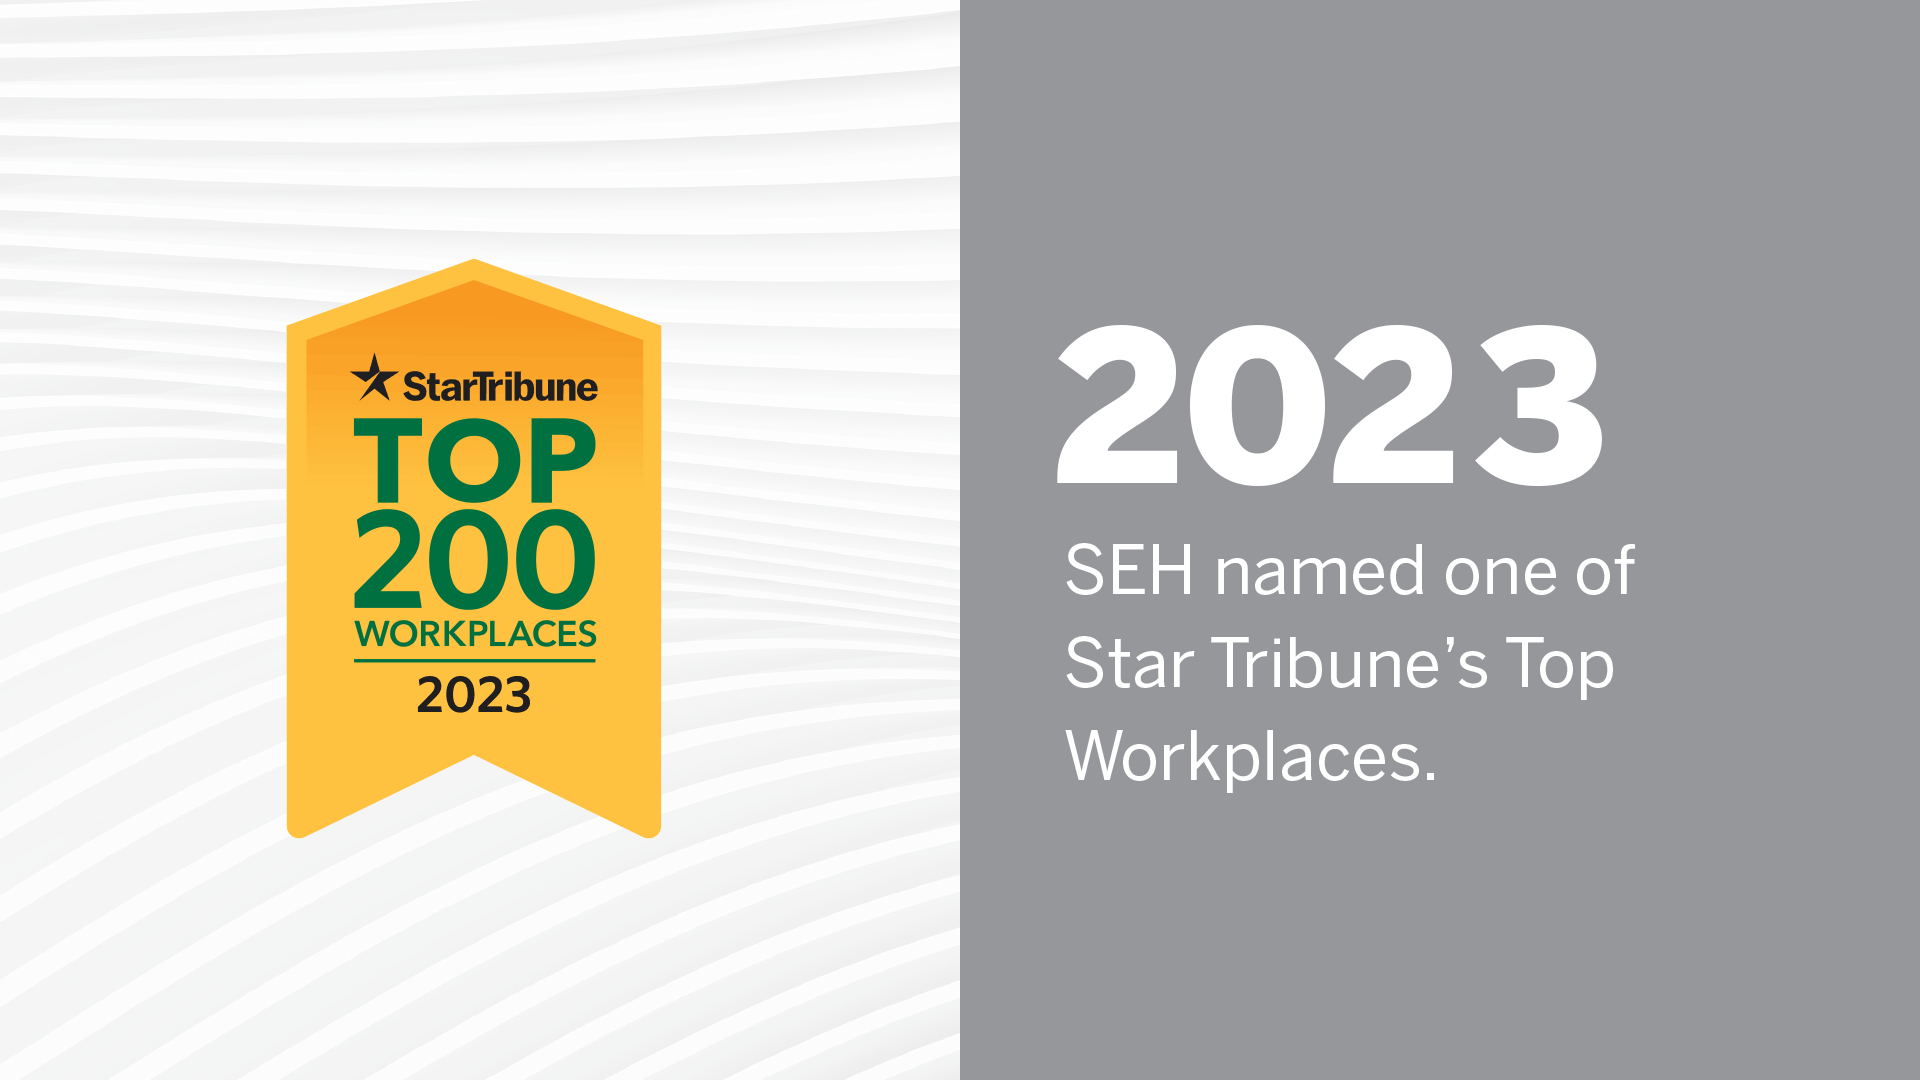 Graphic that says "SEH named one of Star Tribune's Top Workplaces."